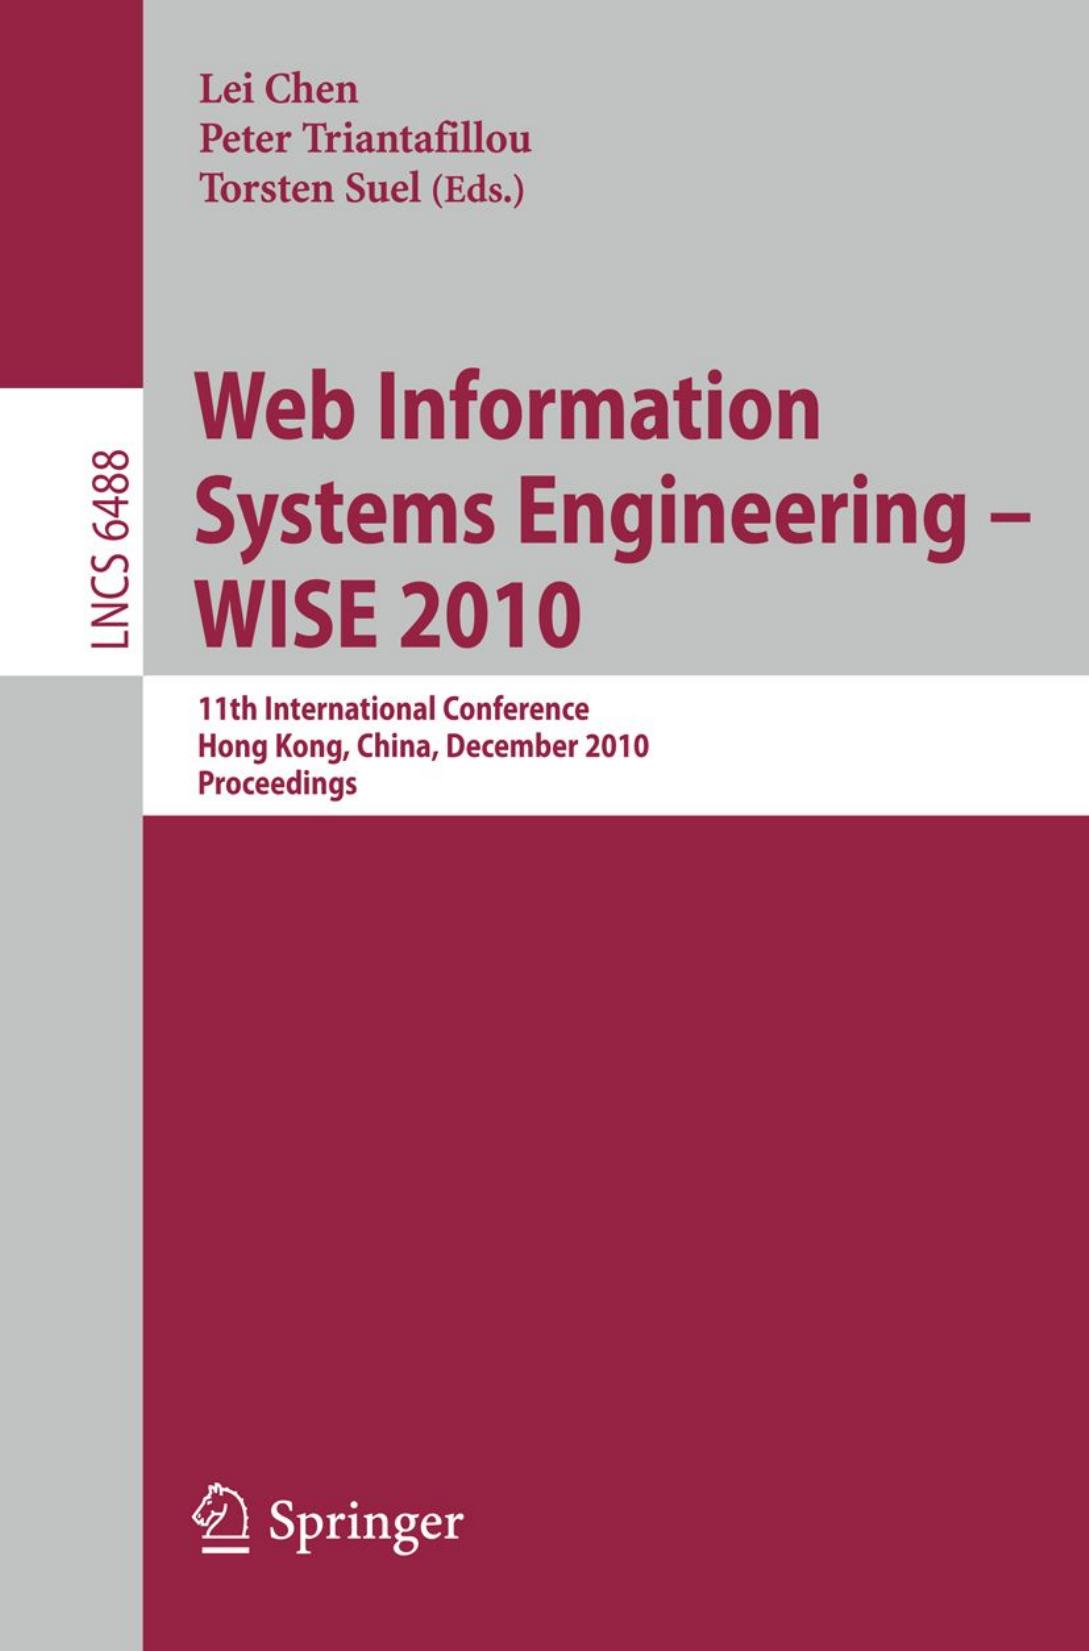 Information Systems and Applications, incl. Internet, 2010